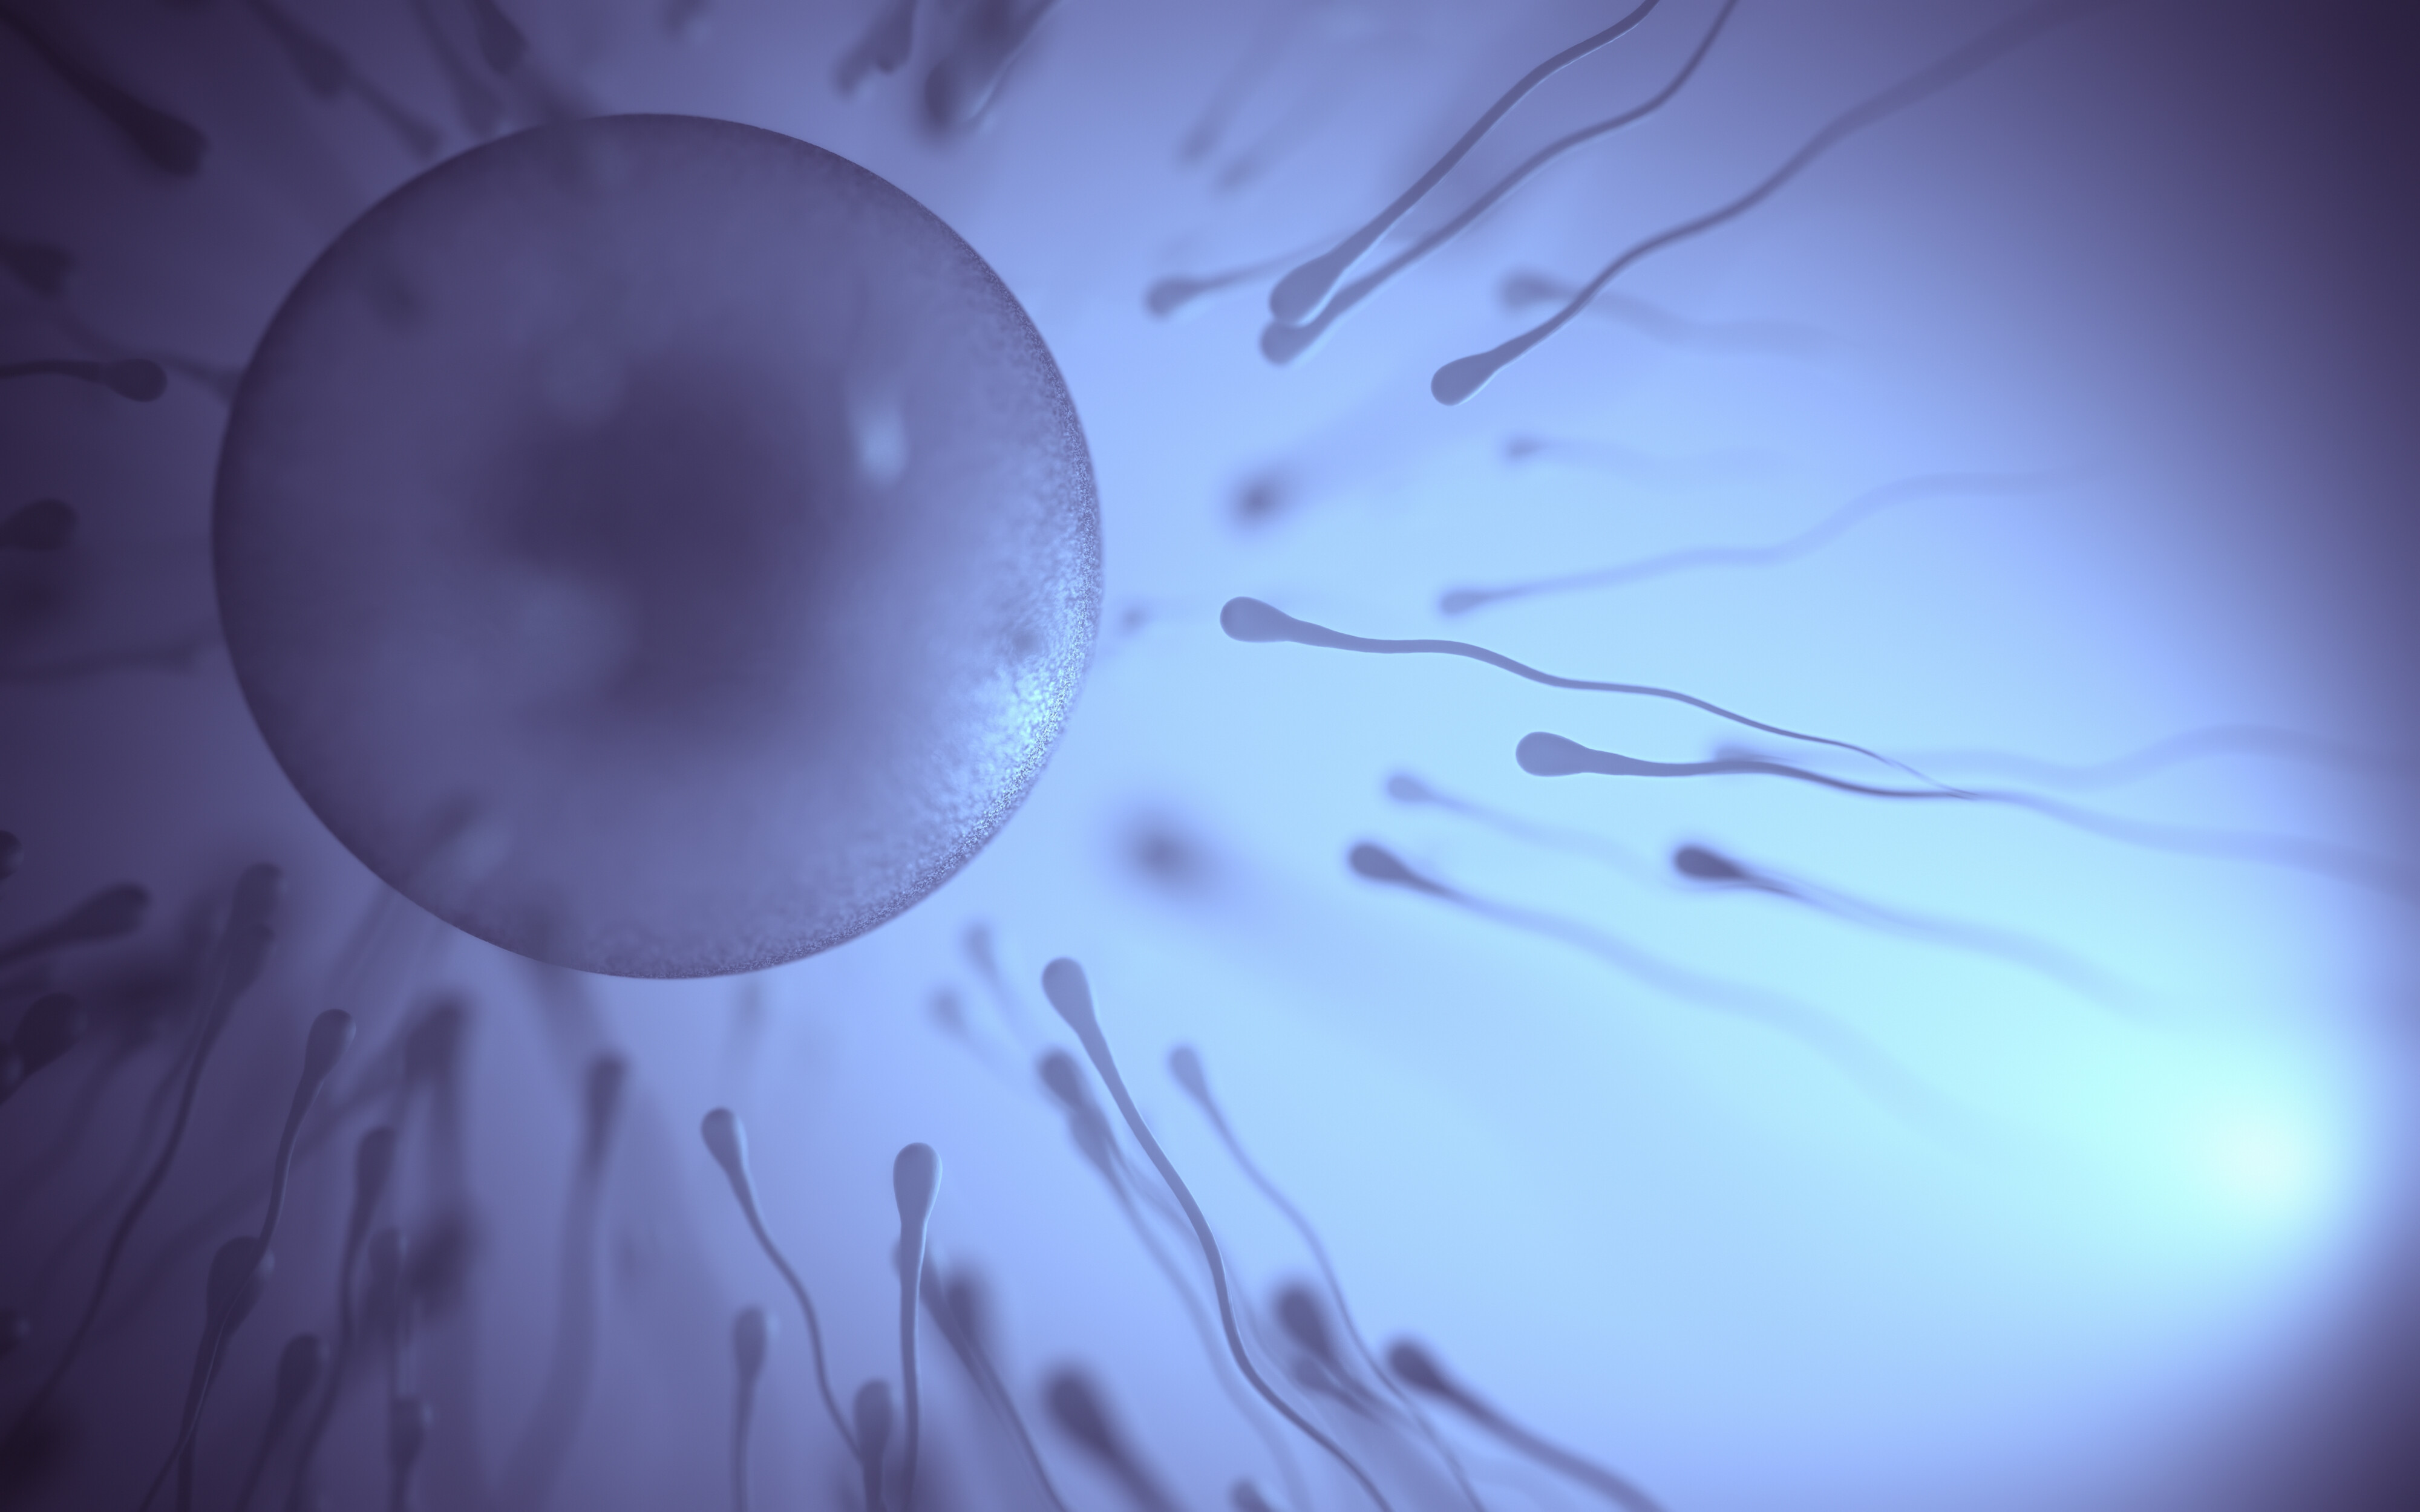 Male Fertility - What Every Man Should Know Before Trying To Have a Baby